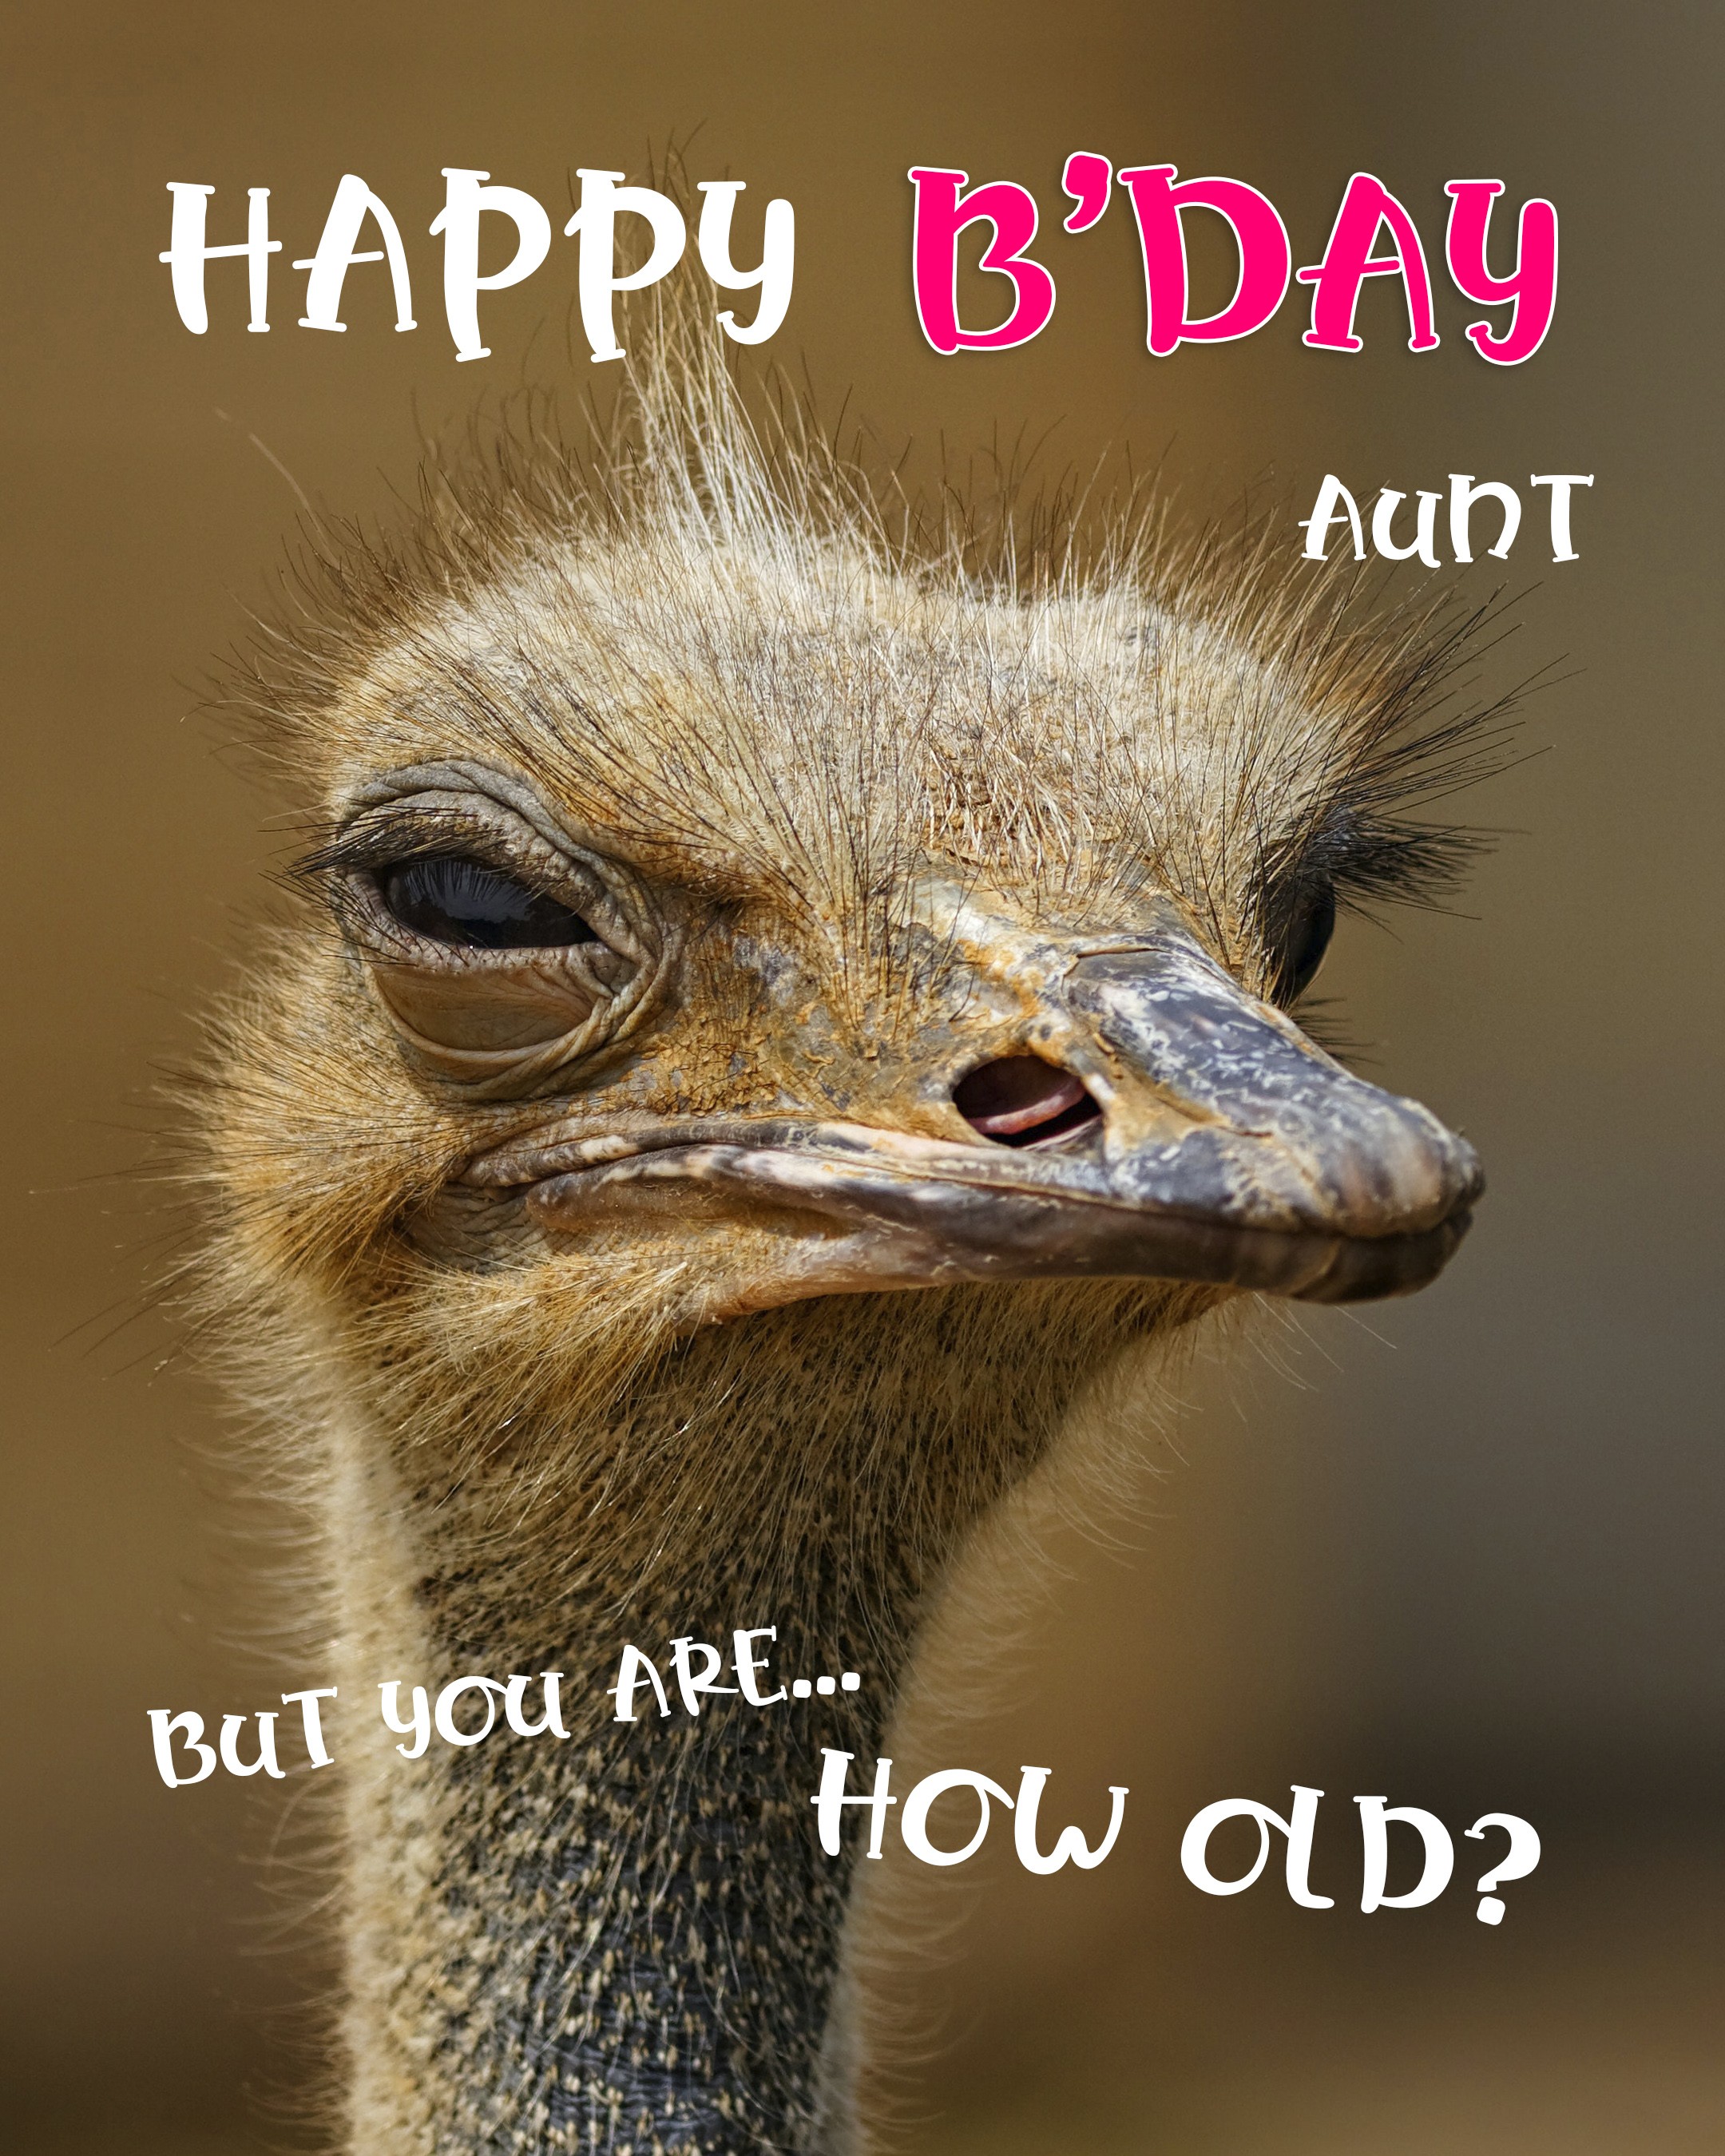 Free Funny Happy Birthday Image For Aunt With Ostrich - birthdayimg.com